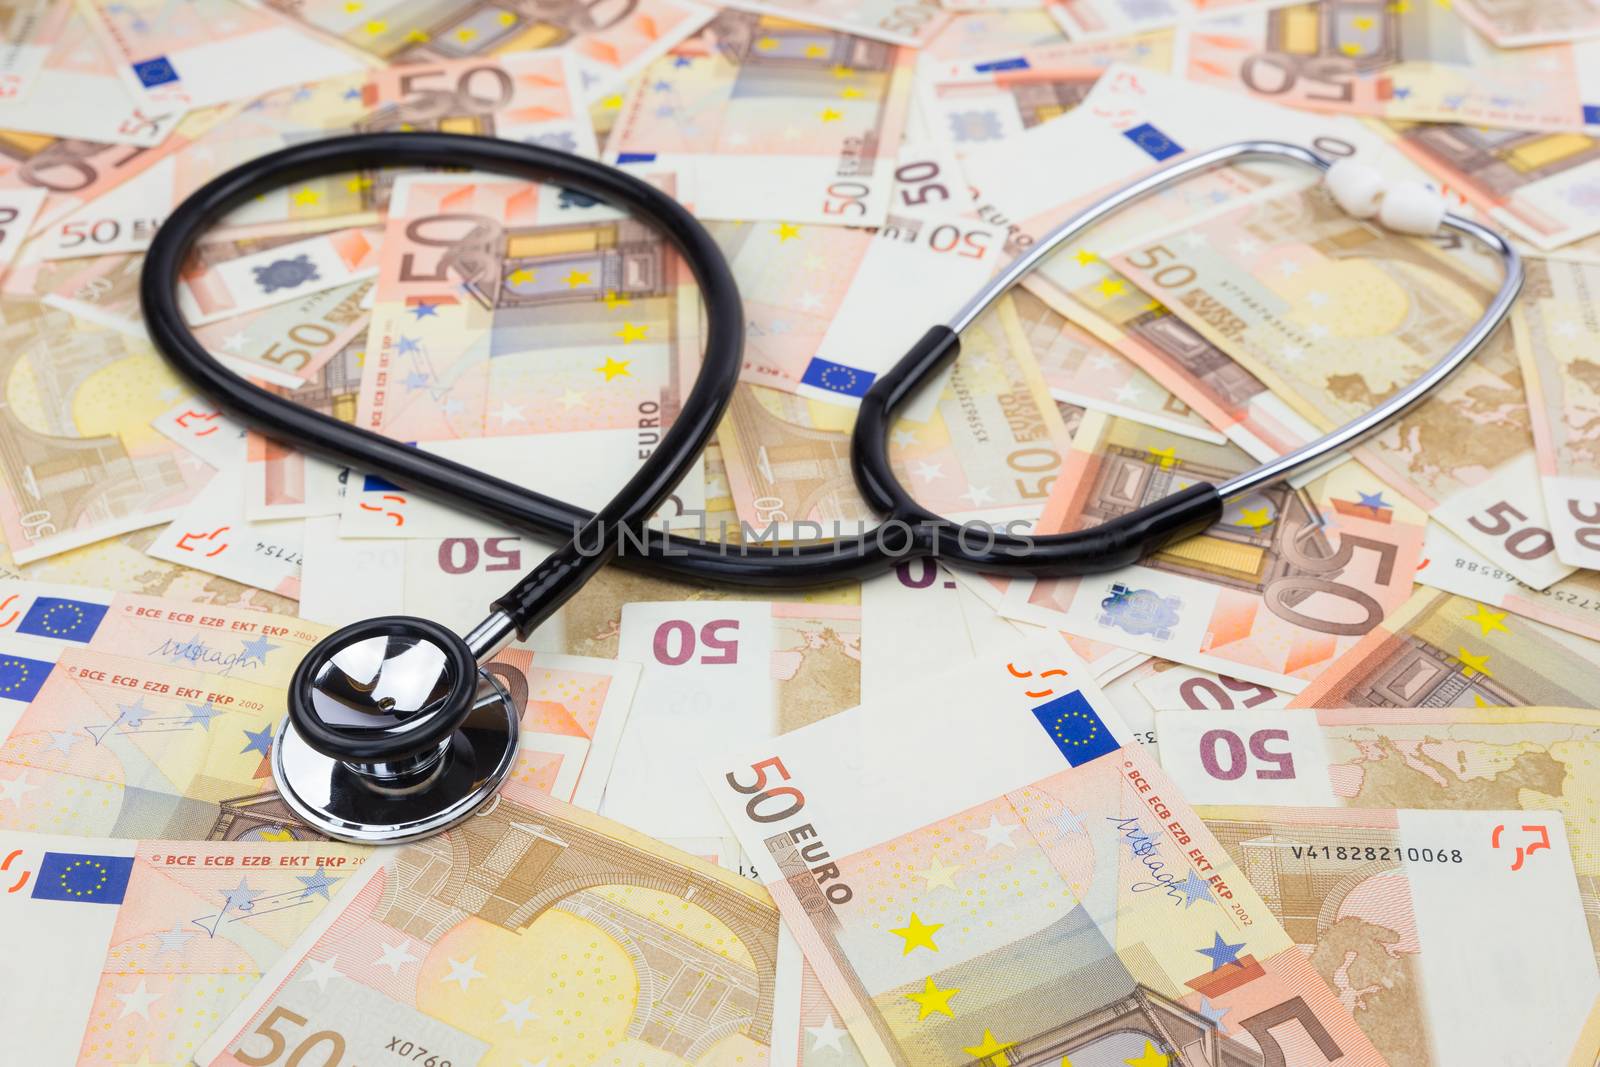 Black professional stethoscope lying on many euro notes by BenSchonewille